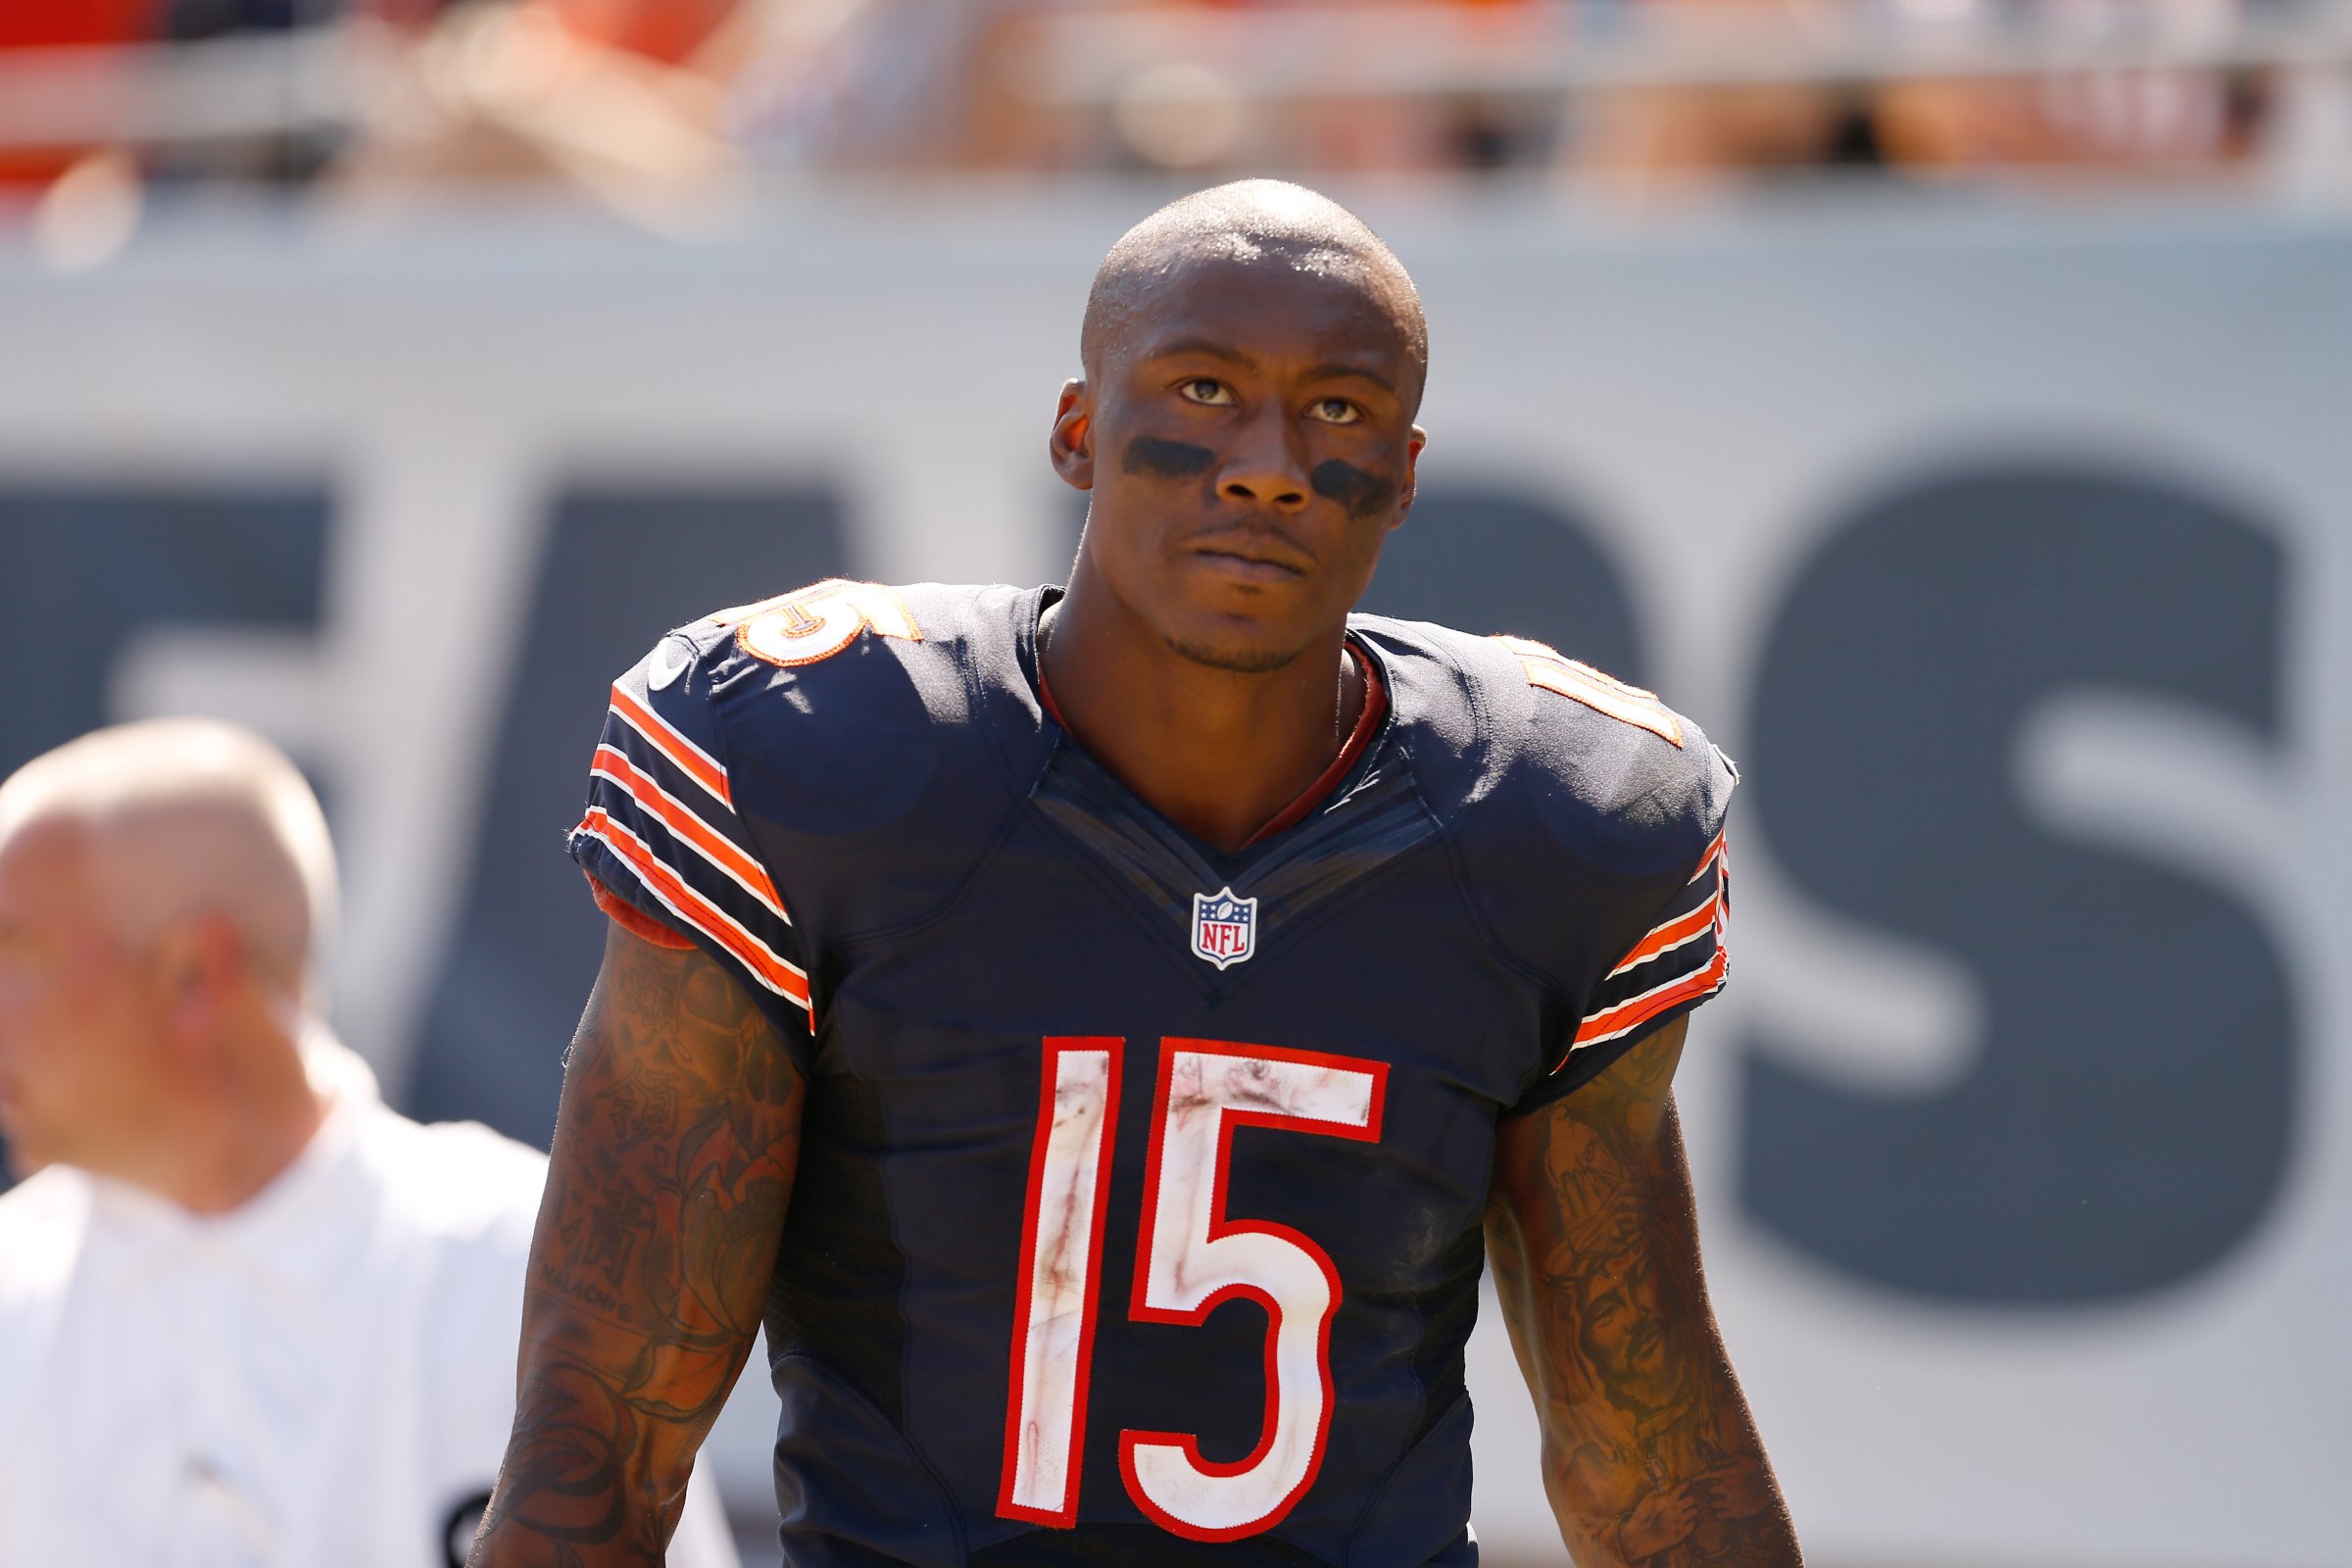 Chicago Bears wide receiver Brandon Marshall looks on from the sidelines during a game against the Buffalo Bills in Chicago on Sept. 7, 2014.